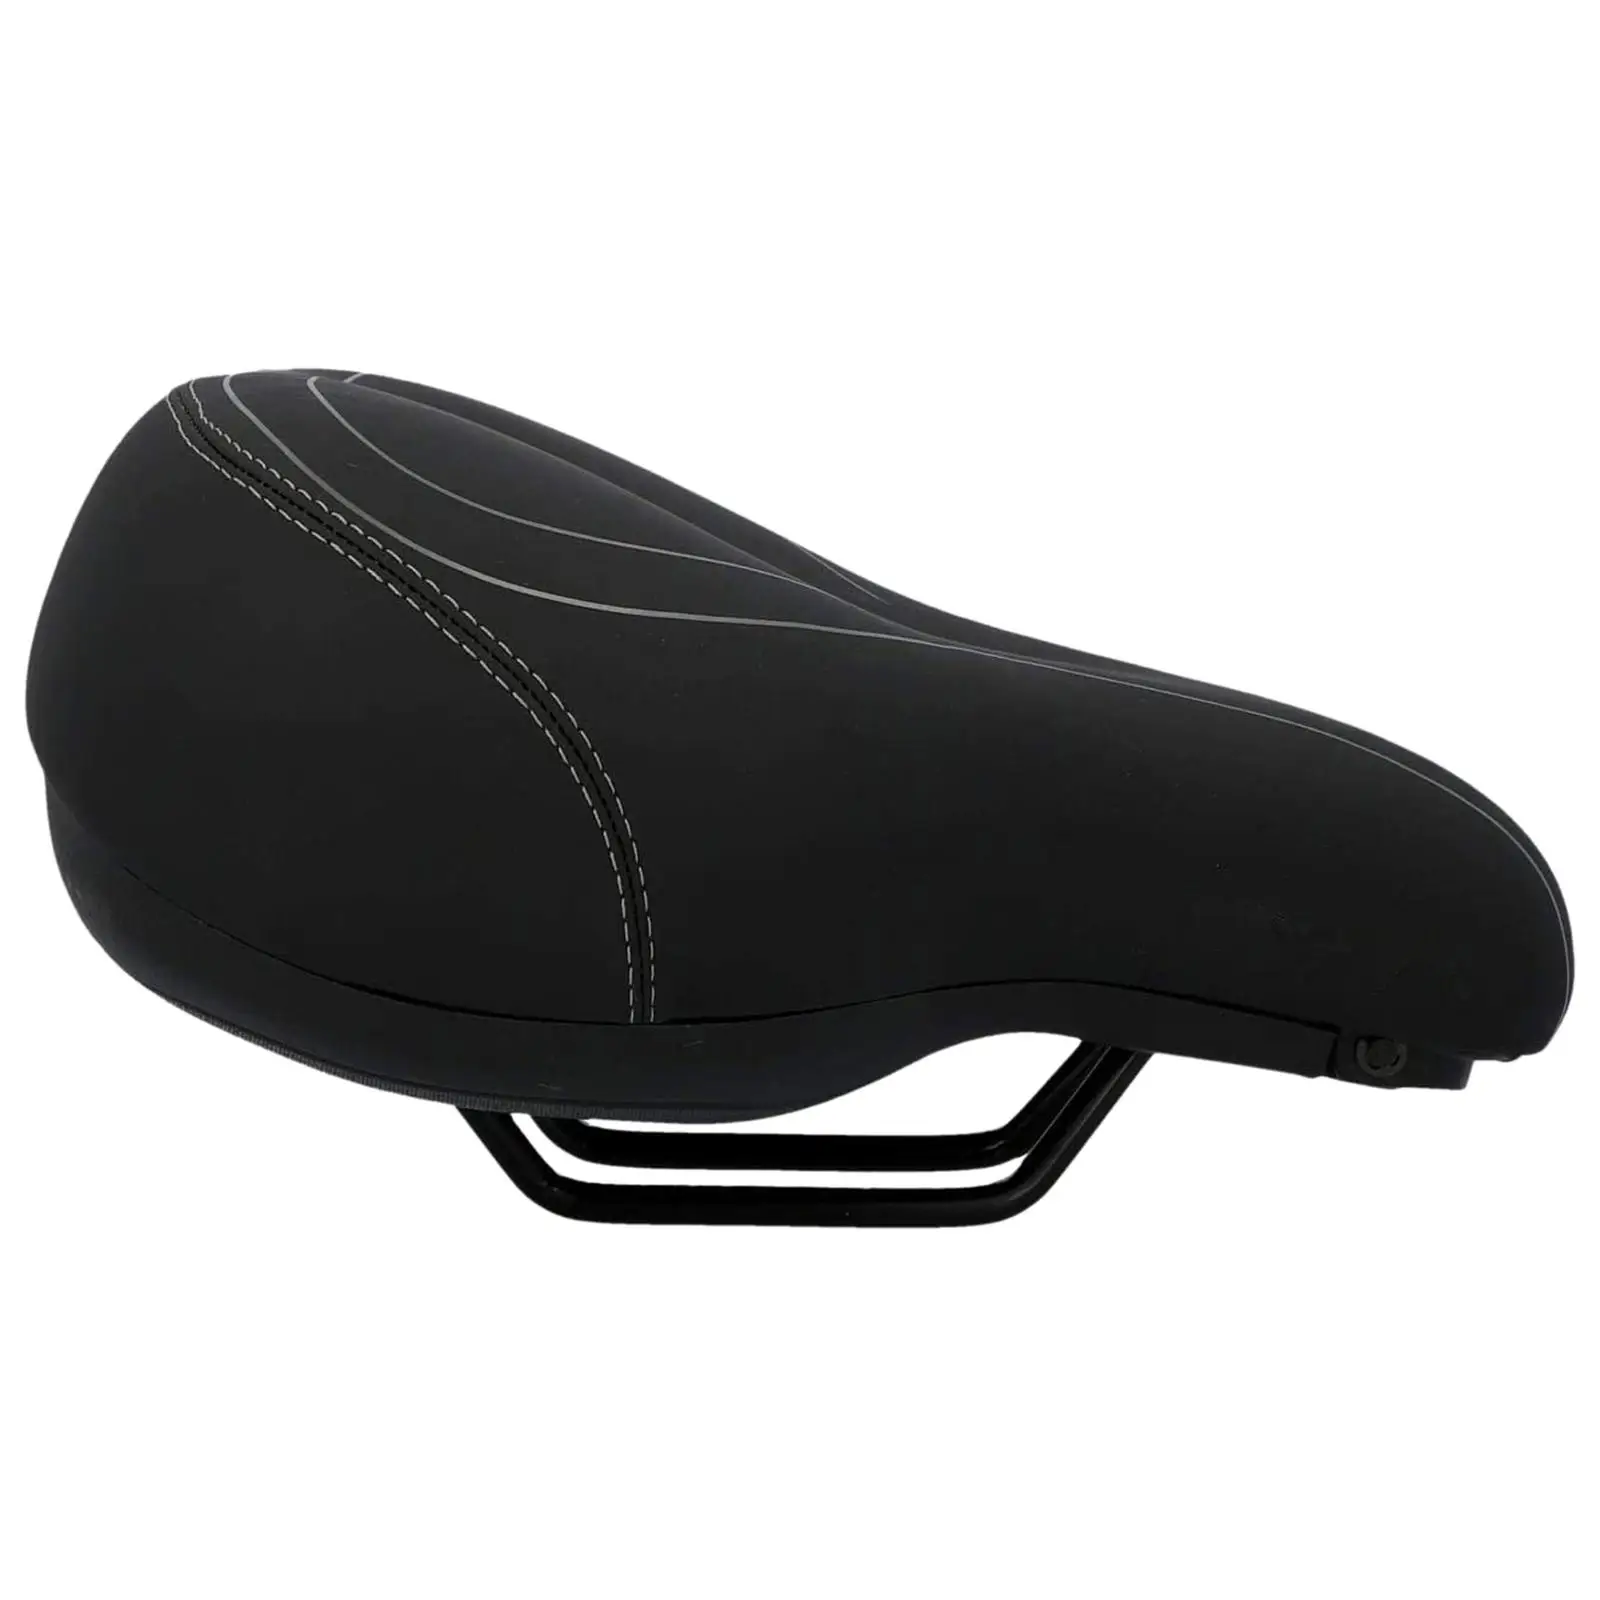 Comfort Bicycle Seat with Storage Space Waterproof Shock Absorber Biking Seat for Mountain Road Bike Cycling Accessories